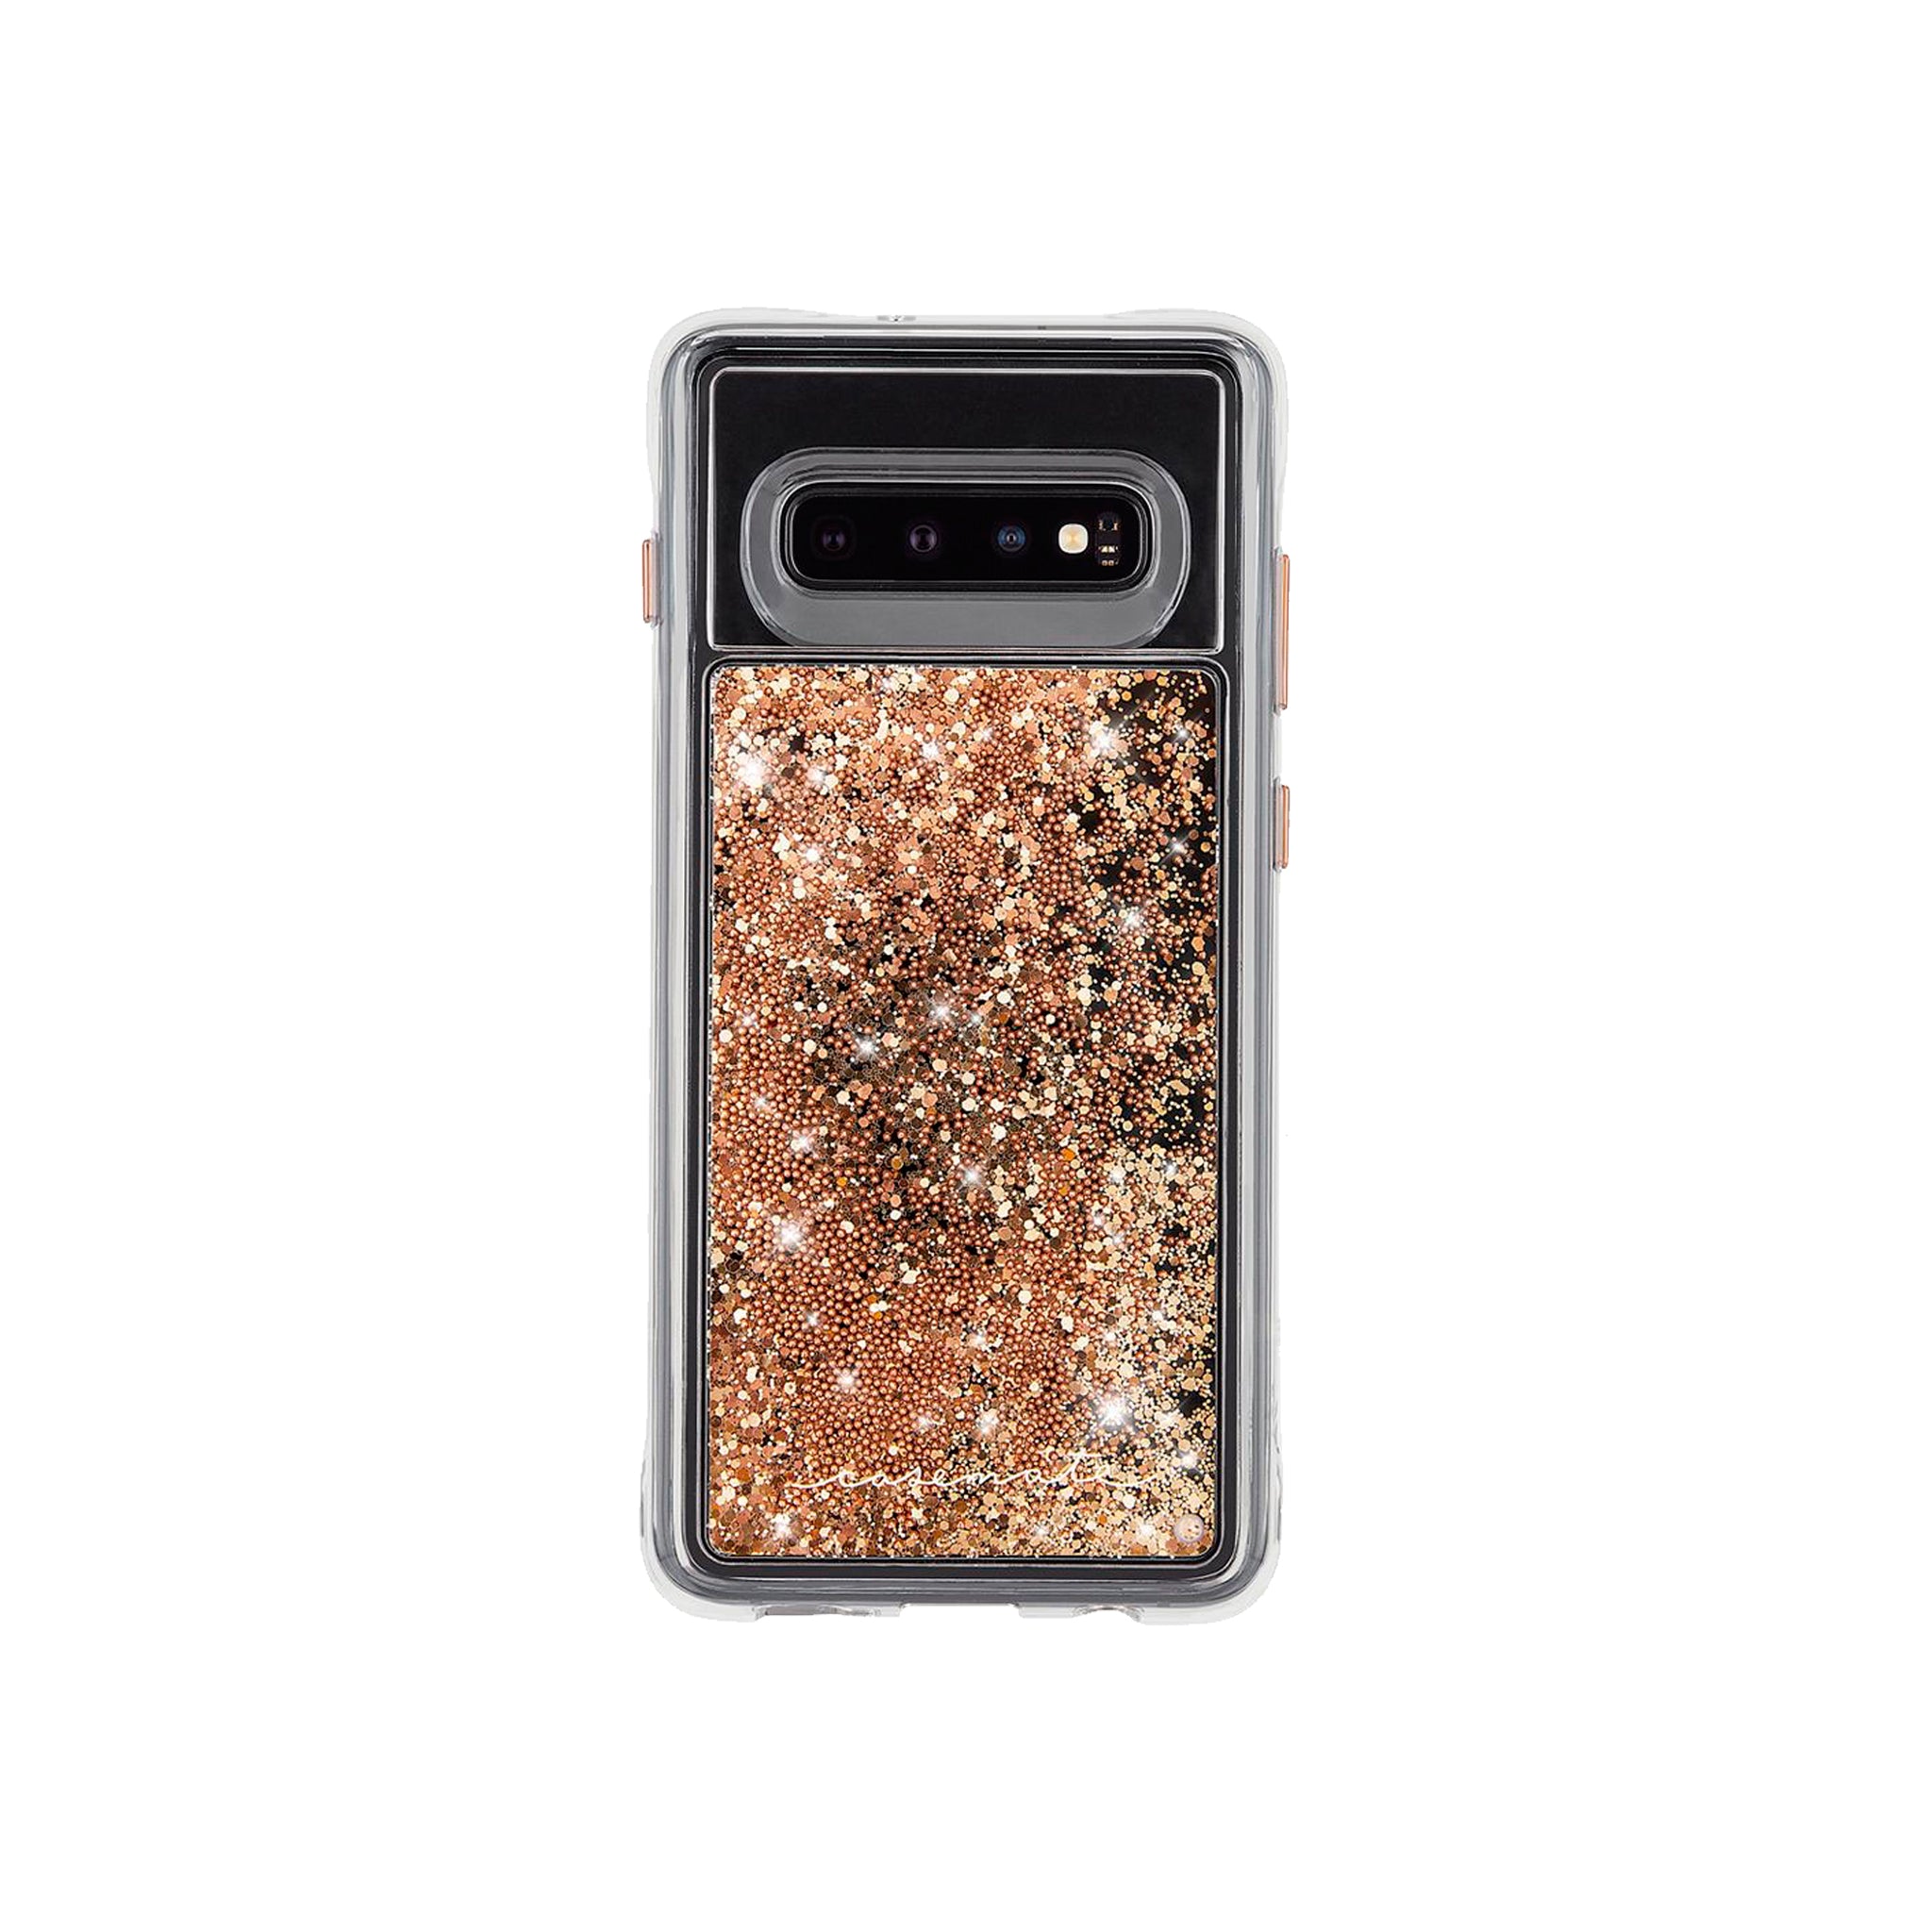 Case-mate - Waterfall Case For Samsung Galaxy S10 - Gold